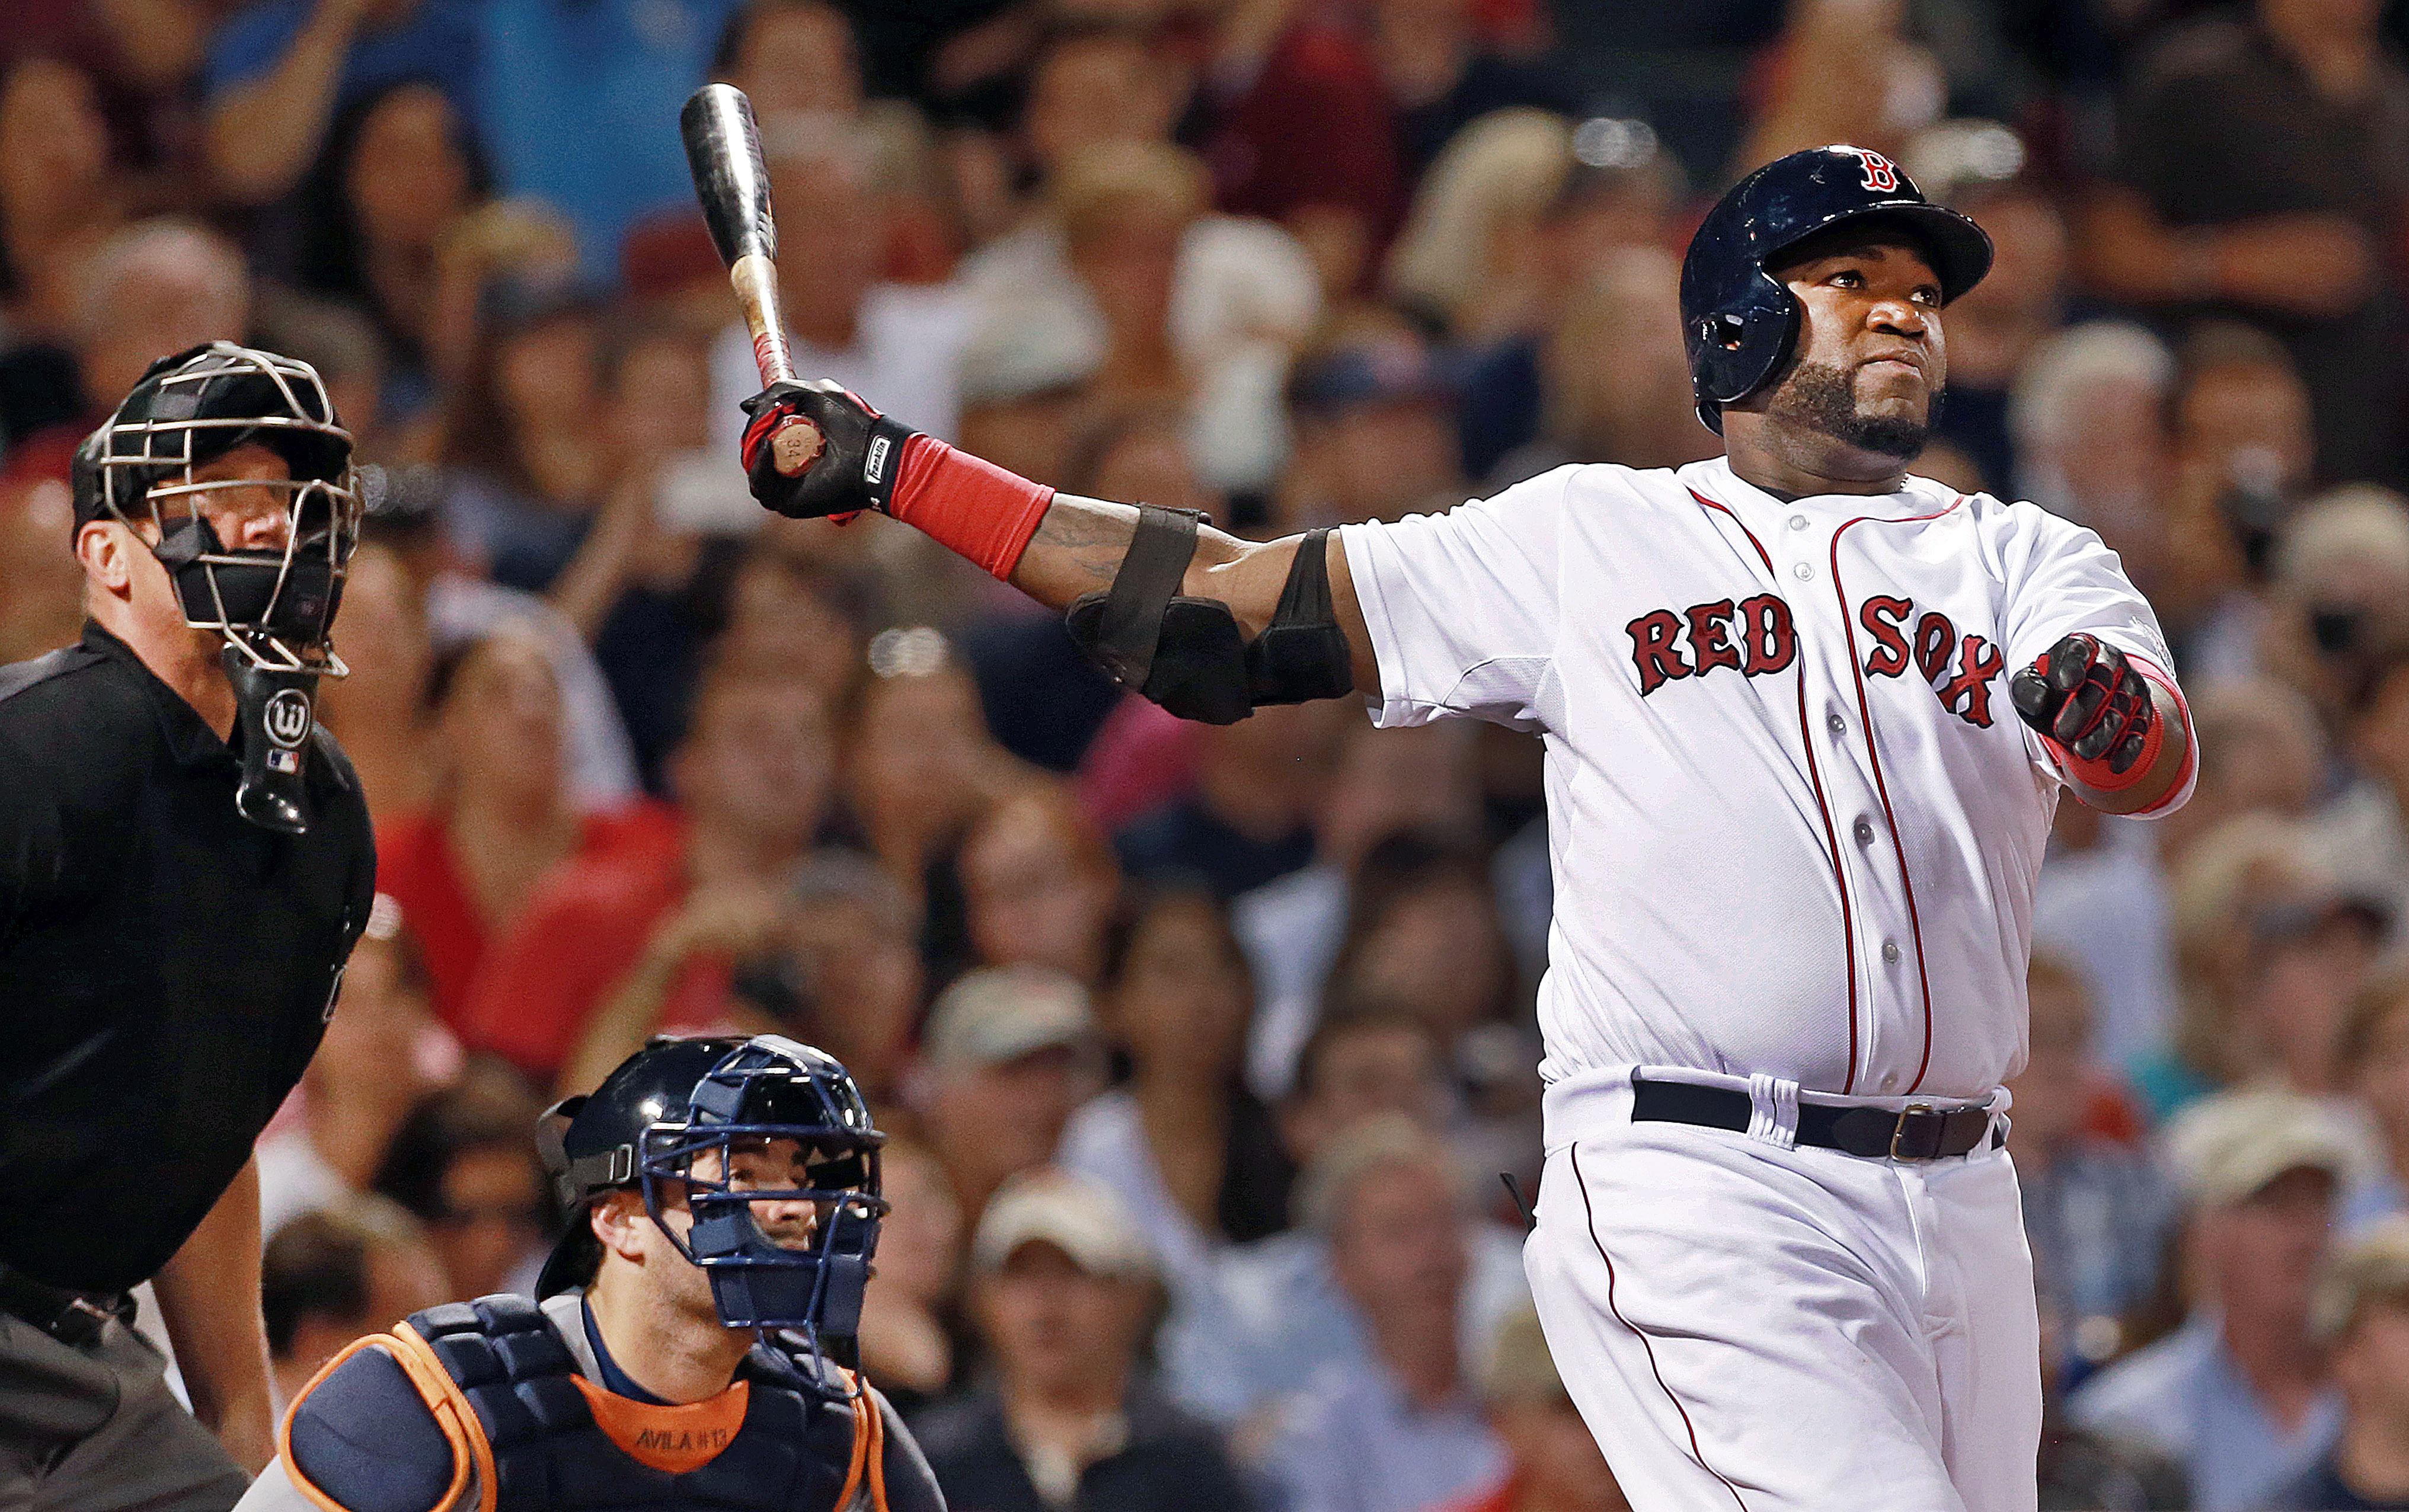 Ortiz's 1,999th career hit was a home run against the Tigers on Sept. 4, 2013.